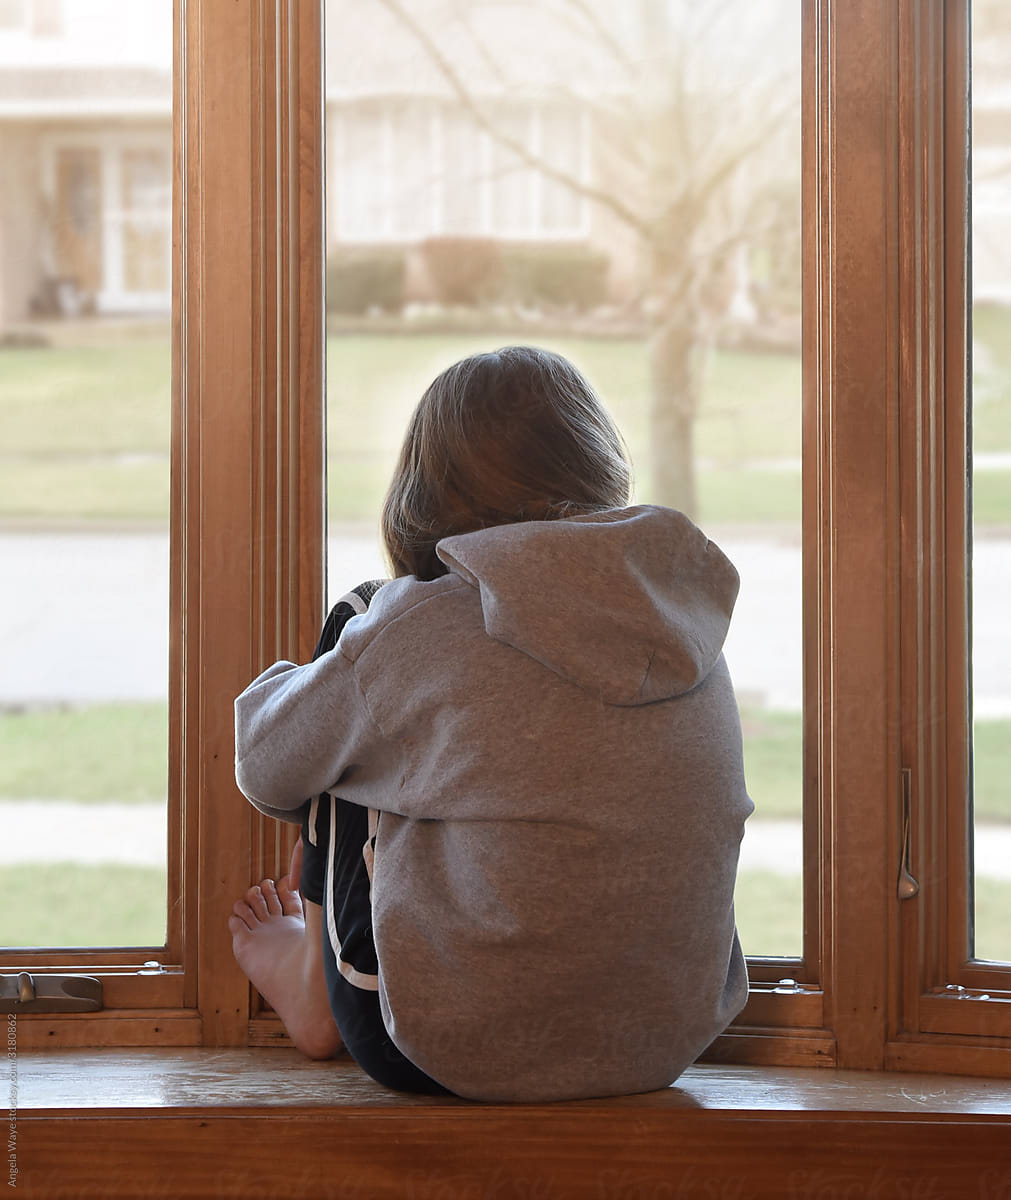 Lonely Child Looking Outside Her Window